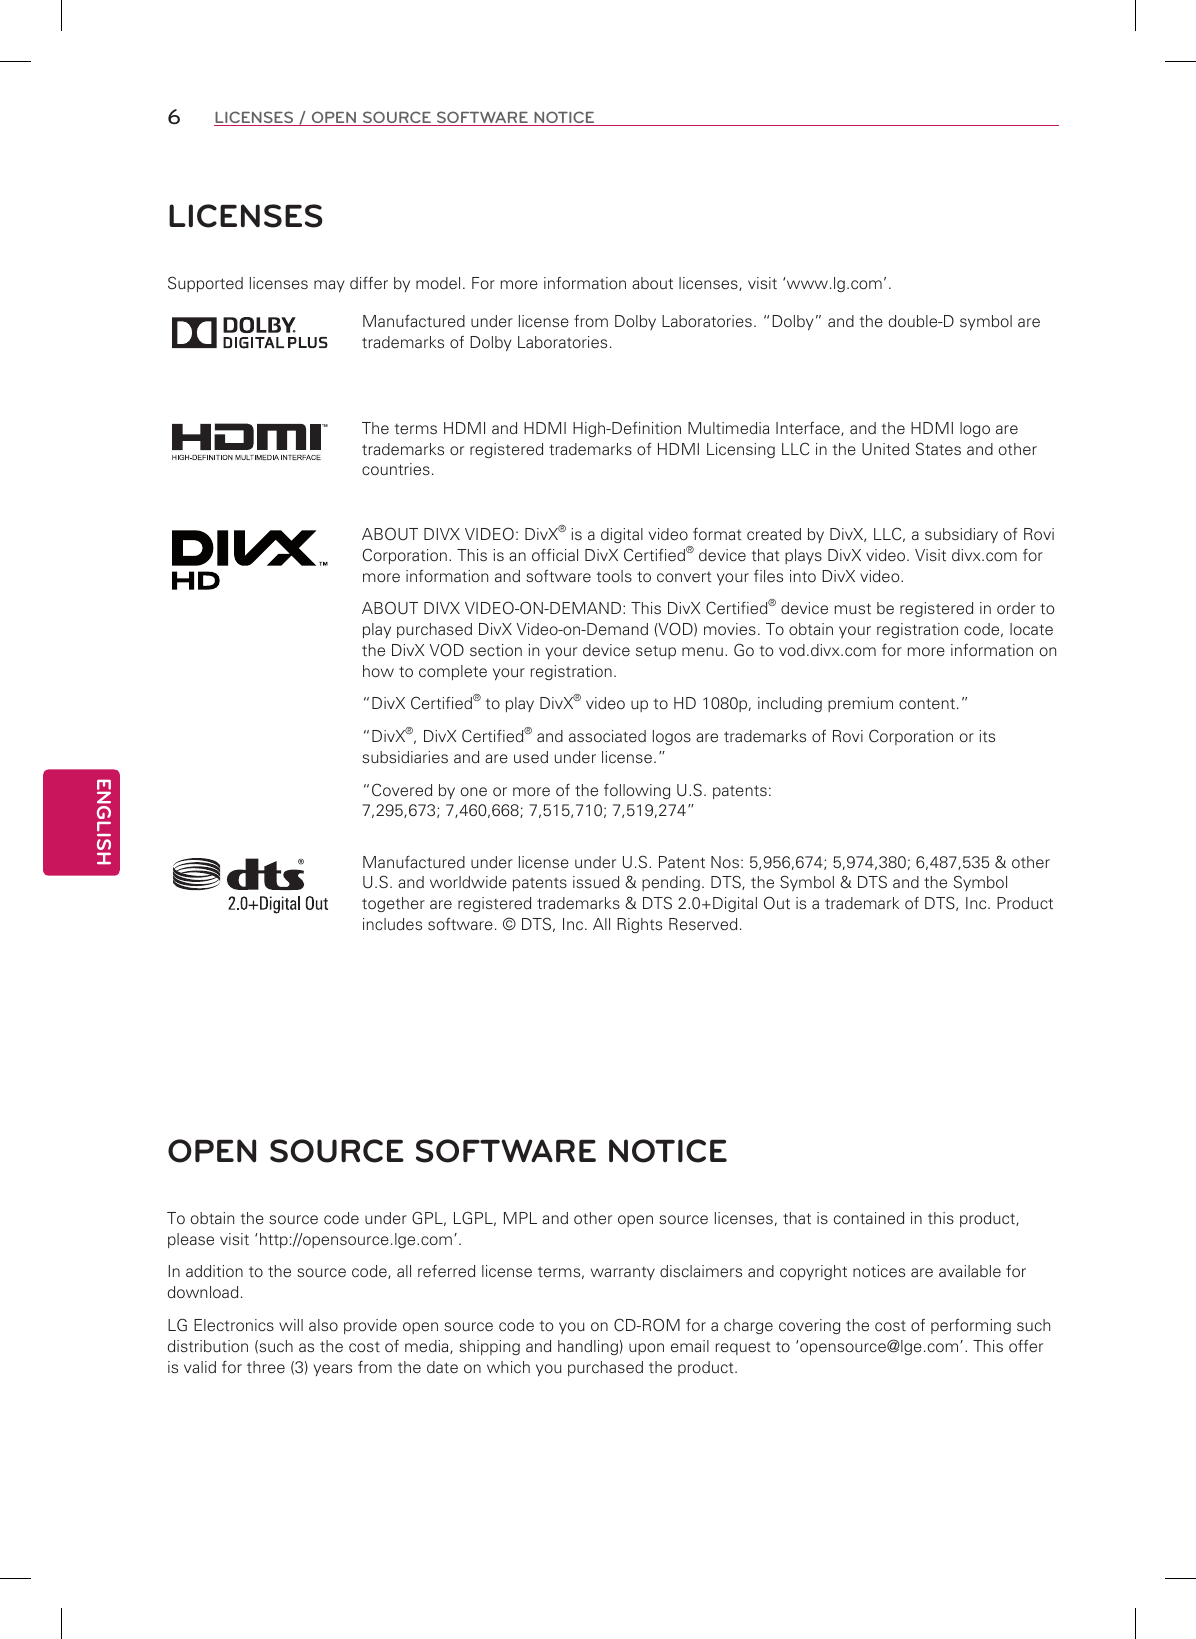 ENGLISH6LICENSES / OPEN SOURCE SOFTWARE NOTICELICENSESSupported licenses may differ by model. For more information about licenses, visit ‘www.lg.com’.Manufactured under license from Dolby Laboratories. “Dolby” and the double-D symbol are trademarks of Dolby Laboratories.The terms HDMI and HDMI High-Definition Multimedia Interface, and the HDMI logo are trademarks or registered trademarks of HDMI Licensing LLC in the United States and other countries.ABOUT DIVX VIDEO: DivX® is a digital video format created by DivX, LLC, a subsidiary of Rovi Corporation. This is an official DivX Certified® device that plays DivX video. Visit divx.com for more information and software tools to convert your files into DivX video.ABOUT DIVX VIDEO-ON-DEMAND: This DivX Certified® device must be registered in order to play purchased DivX Video-on-Demand (VOD) movies. To obtain your registration code, locate the DivX VOD section in your device setup menu. Go to vod.divx.com for more information on how to complete your registration. “DivX Certified® to play DivX® video up to HD 1080p, including premium content.”“DivX®, DivX Certified® and associated logos are trademarks of Rovi Corporation or its subsidiaries and are used under license.”“Covered by one or more of the following U.S. patents: 7,295,673; 7,460,668; 7,515,710; 7,519,274”Manufactured under license under U.S. Patent Nos: 5,956,674; 5,974,380; 6,487,535 &amp; other U.S. and worldwide patents issued &amp; pending. DTS, the Symbol &amp; DTS and the Symbol together are registered trademarks &amp; DTS 2.0+Digital Out is a trademark of DTS, Inc. Product includes software. © DTS, Inc. All Rights Reserved.OPEN SOURCE SOFTWARE NOTICETo obtain the source code under GPL, LGPL, MPL and other open source licenses, that is contained in this product, please visit ‘http://opensource.lge.com’.In addition to the source code, all referred license terms, warranty disclaimers and copyright notices are available for download.LG Electronics will also provide open source code to you on CD-ROM for a charge covering the cost of performing such distribution (such as the cost of media, shipping and handling) upon email request to ‘opensource@lge.com’. This offer is valid for three (3) years from the date on which you purchased the product.